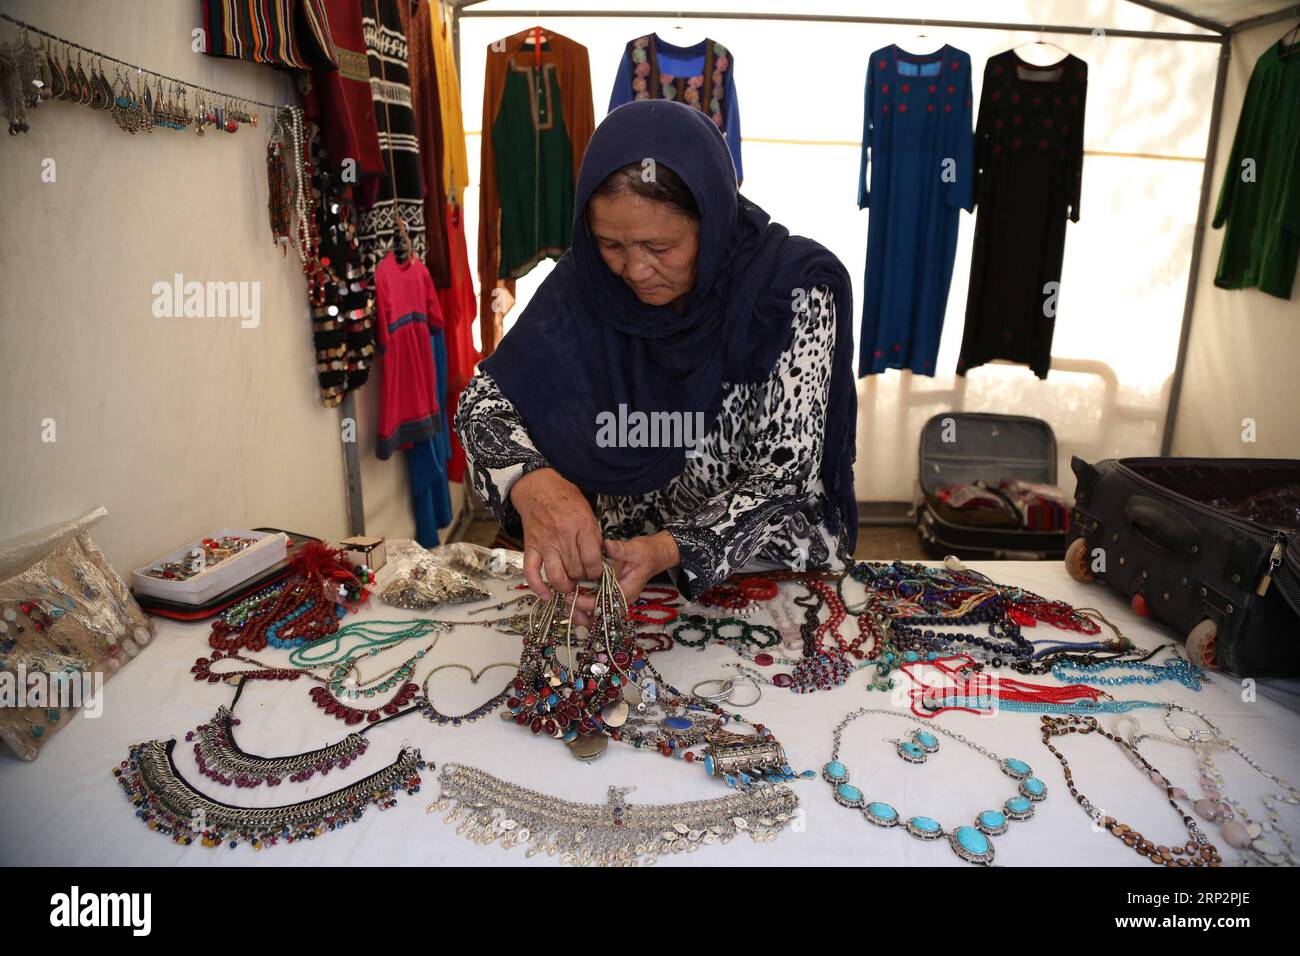 (180909) -- KABUL, Sept. 9, 2018 -- An Afghan woman arranges her products during a product exhibition which organized by women in Kabul, capital of Afghanistan, Sept. 4, 2018. )(yg) AFGHANISTAN-KABUL-PRODUCT EXHIBITION-WOMAN RahmatxAlizadah PUBLICATIONxNOTxINxCHN Stock Photo